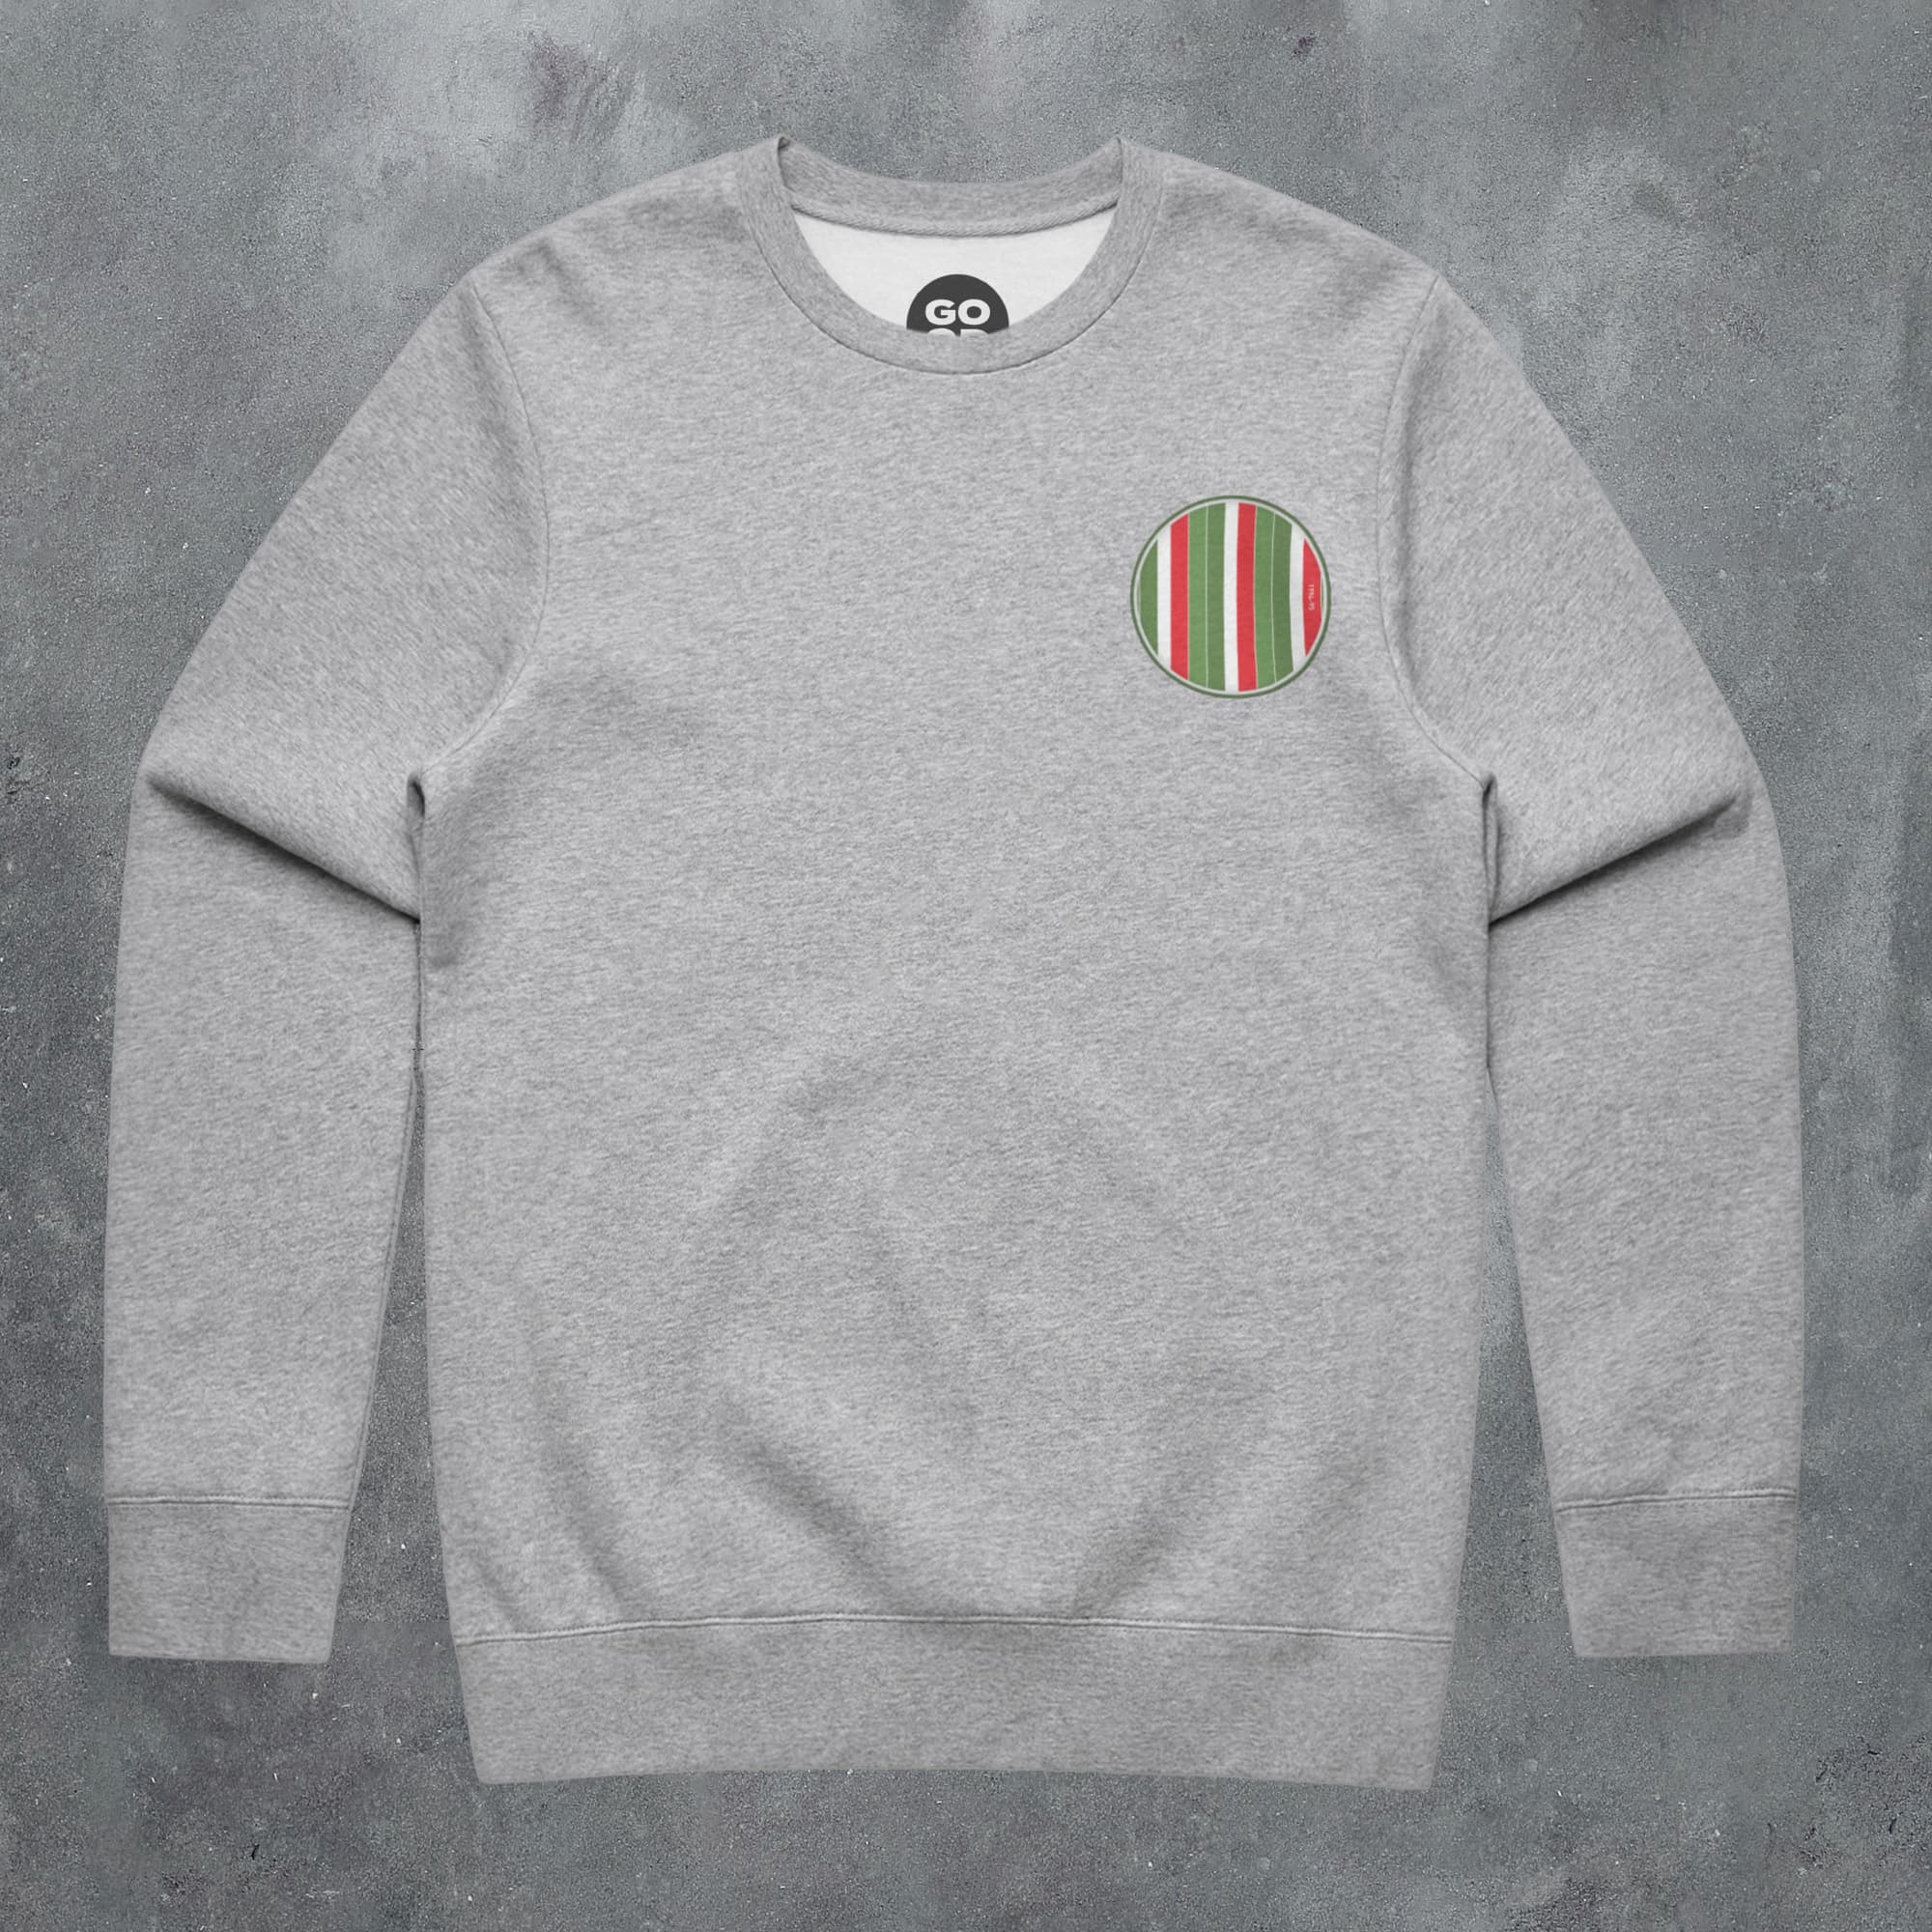 a grey sweatshirt with a red, white, and green striped pocket